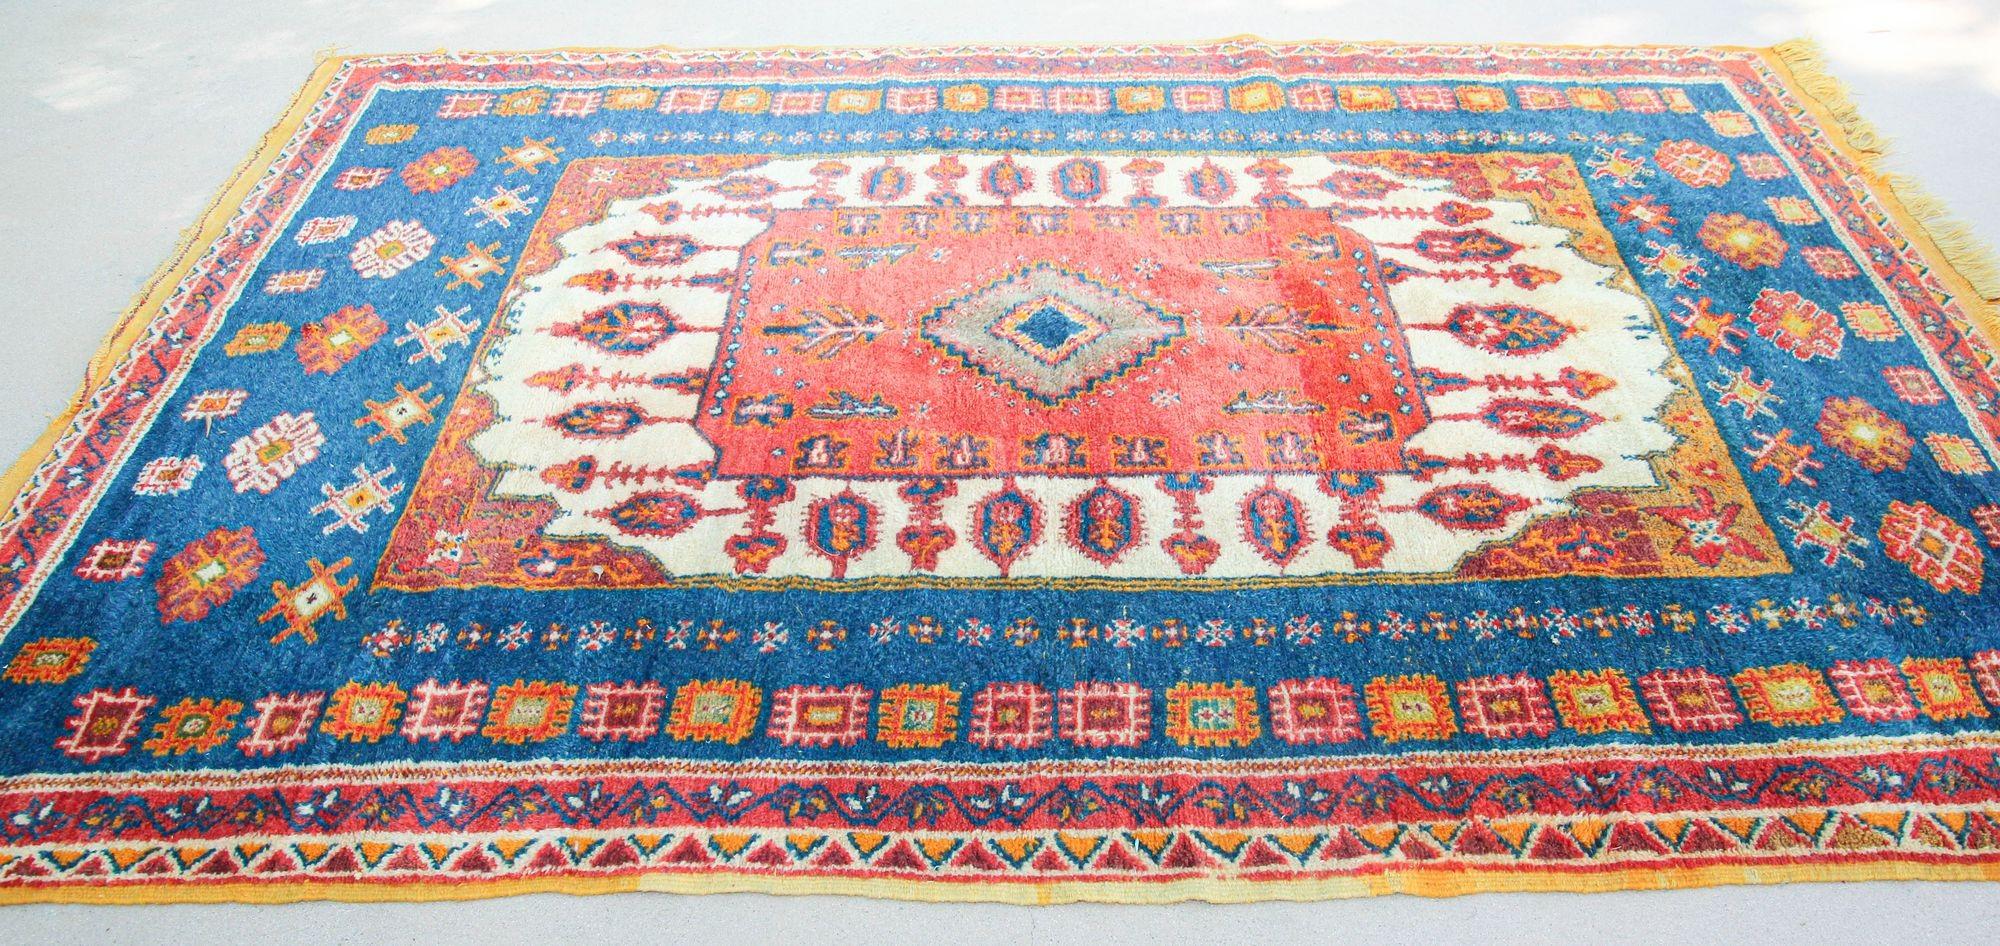 1960s Moroccan Berber Rug in Royal Blue, Pink and Orange Colors For Sale 3